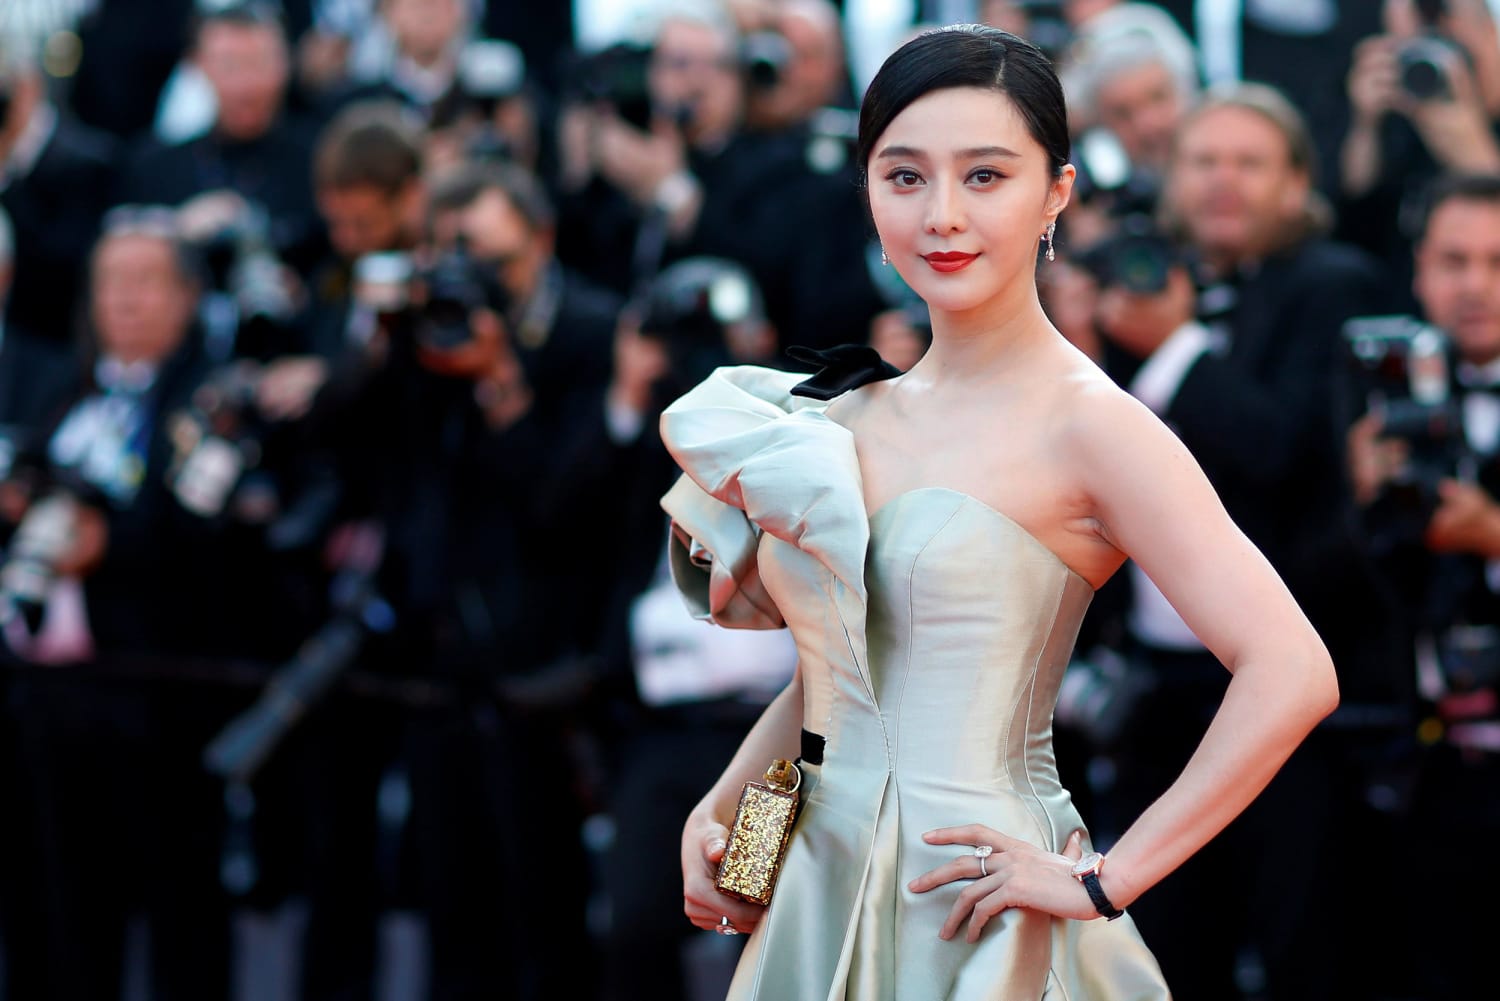 modtagende let at blive såret Mispend In China, a movie star disappears amid culture crackdown